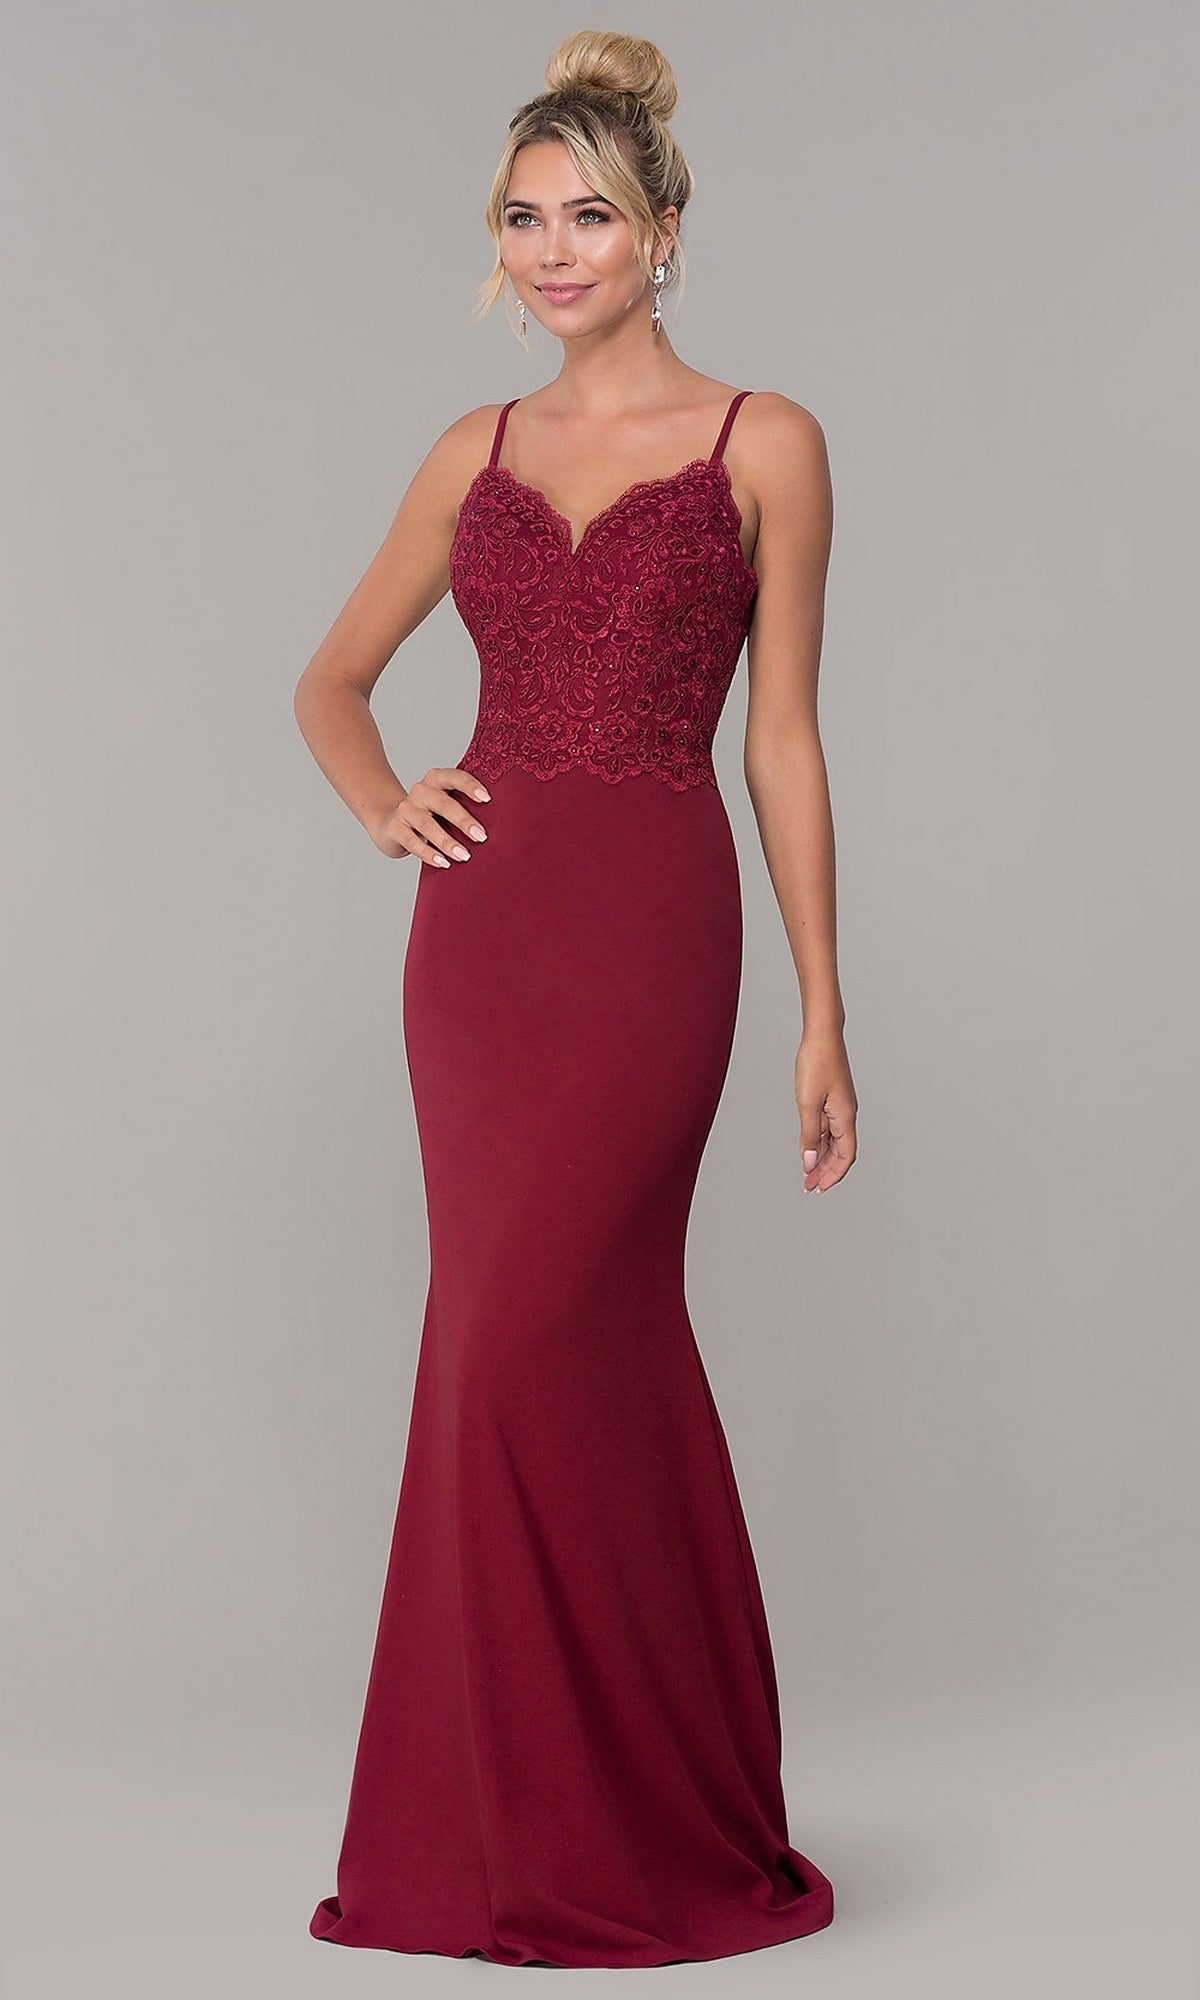 Burgundy Sheath Formal Evening Dress with Lace Bodice